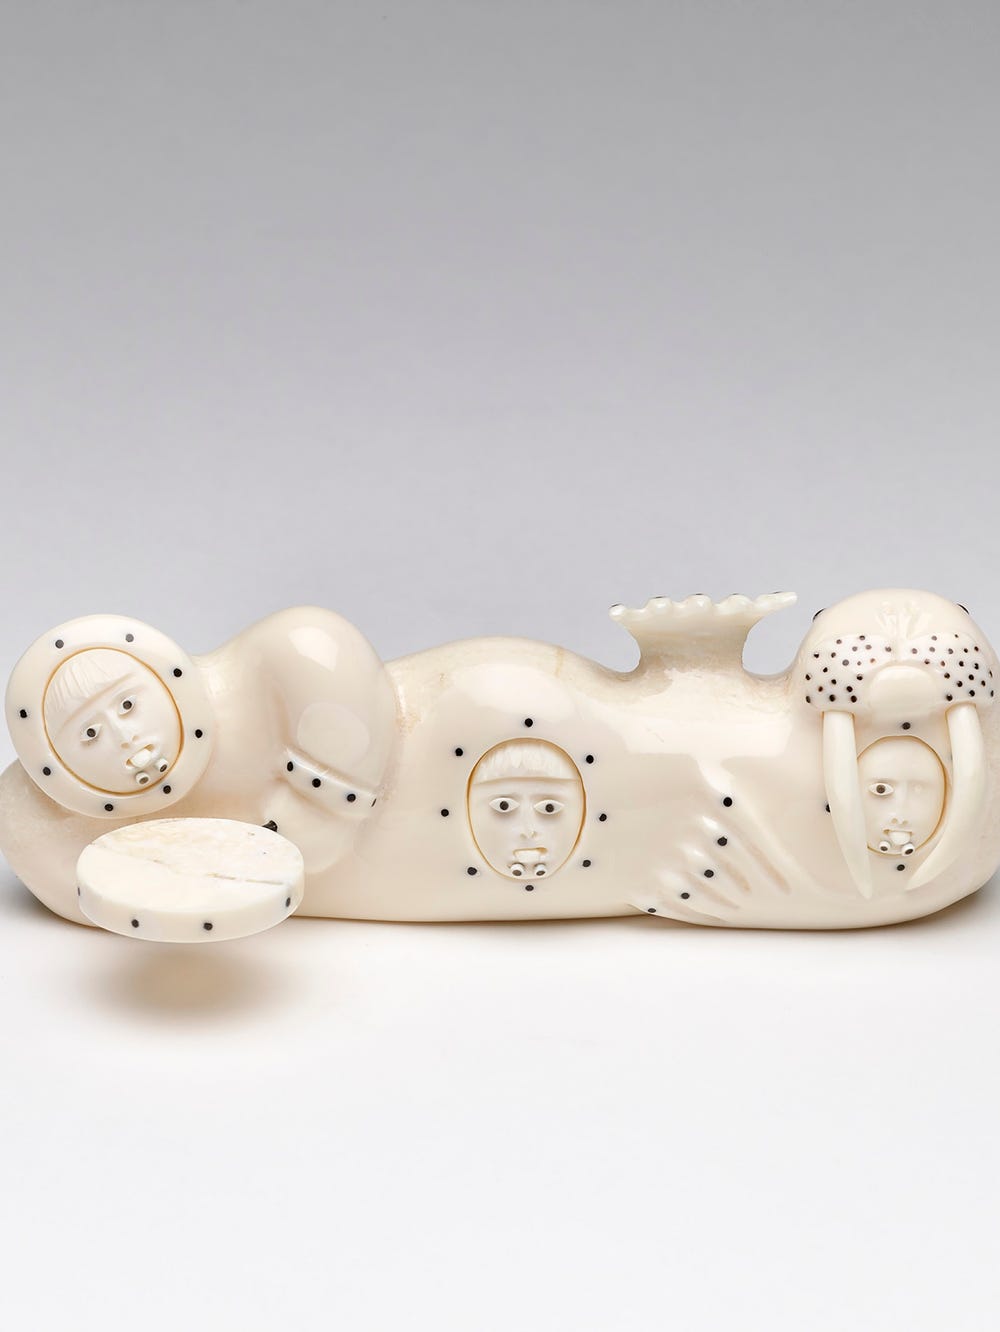 Figurine that is both a drummer and walrus with three faces looking out of their belly